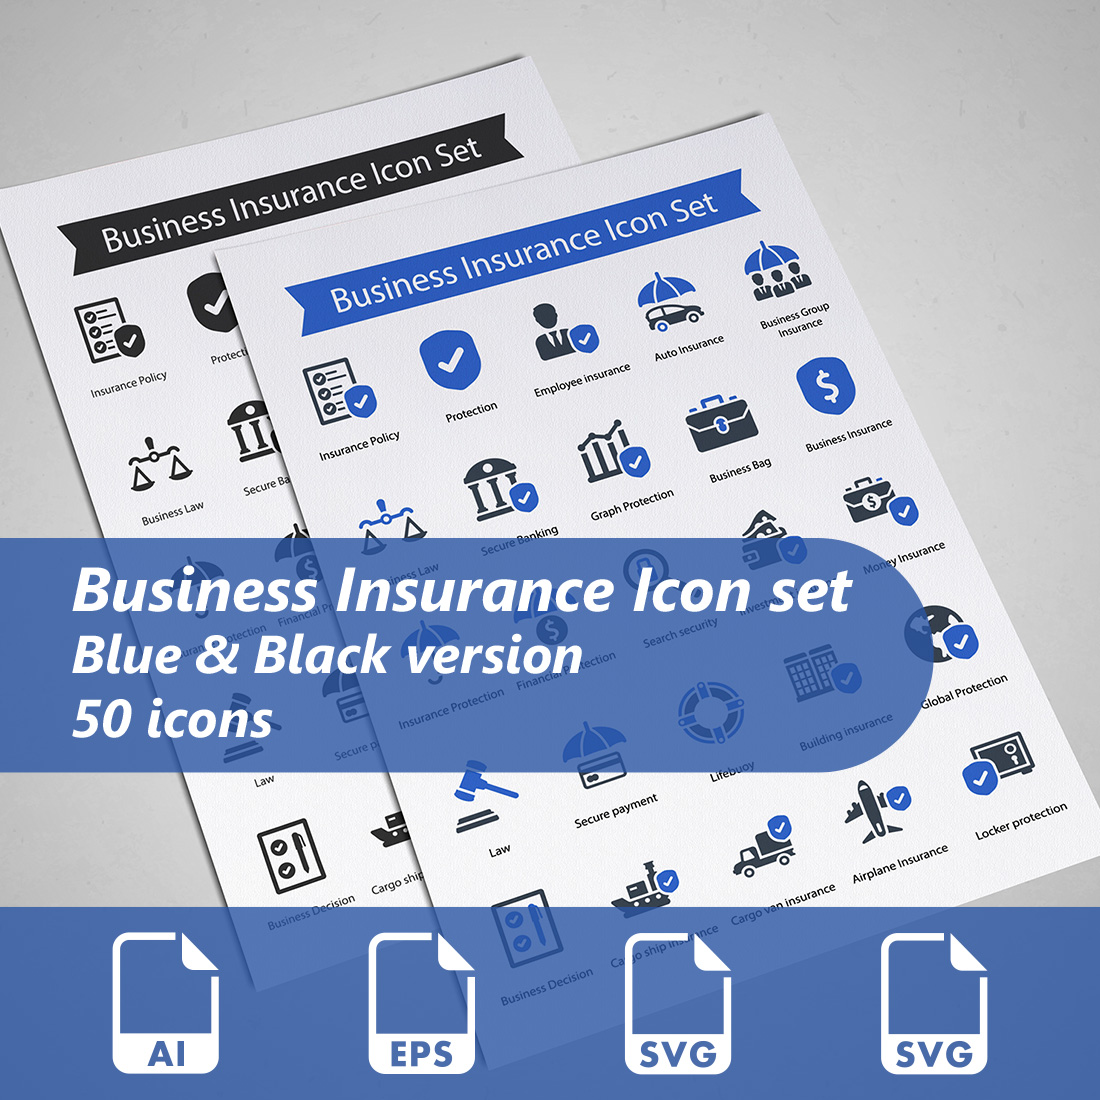 Business Insurance Icon Set cover image.